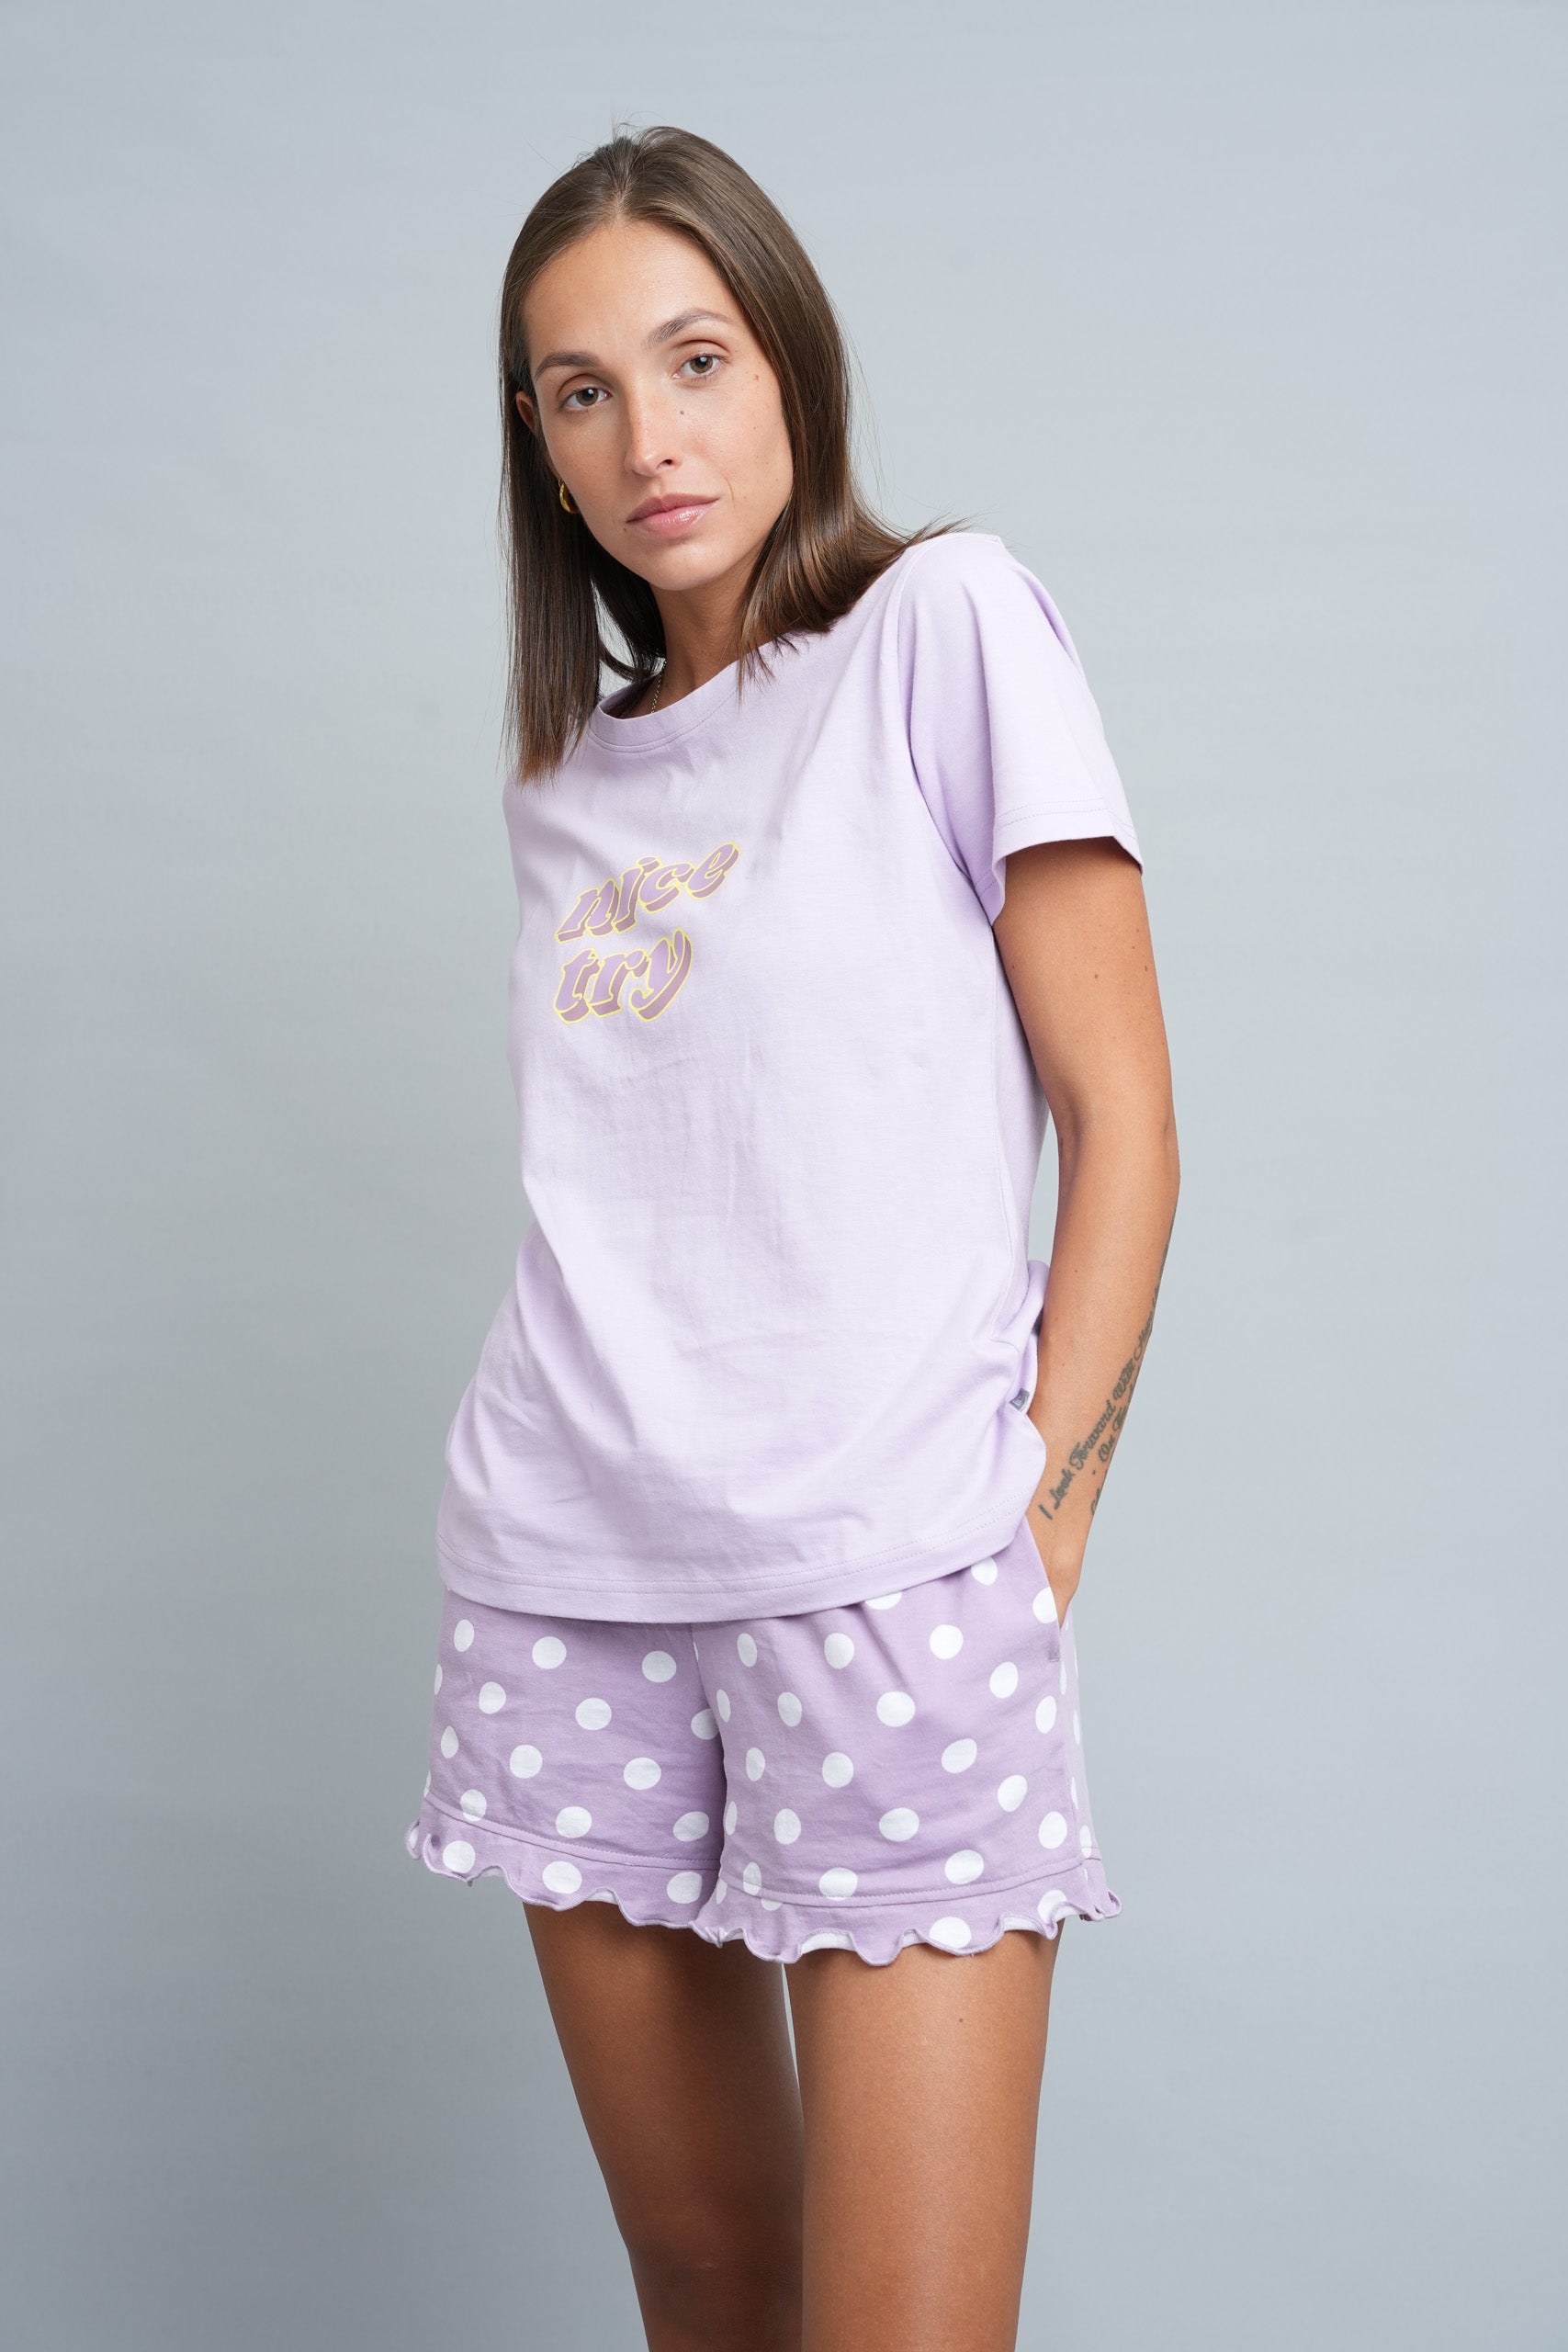 dorable purple pajama shorts set with a plain top and patterned shorts, featuring a playful front rubber print and a frilly hem.